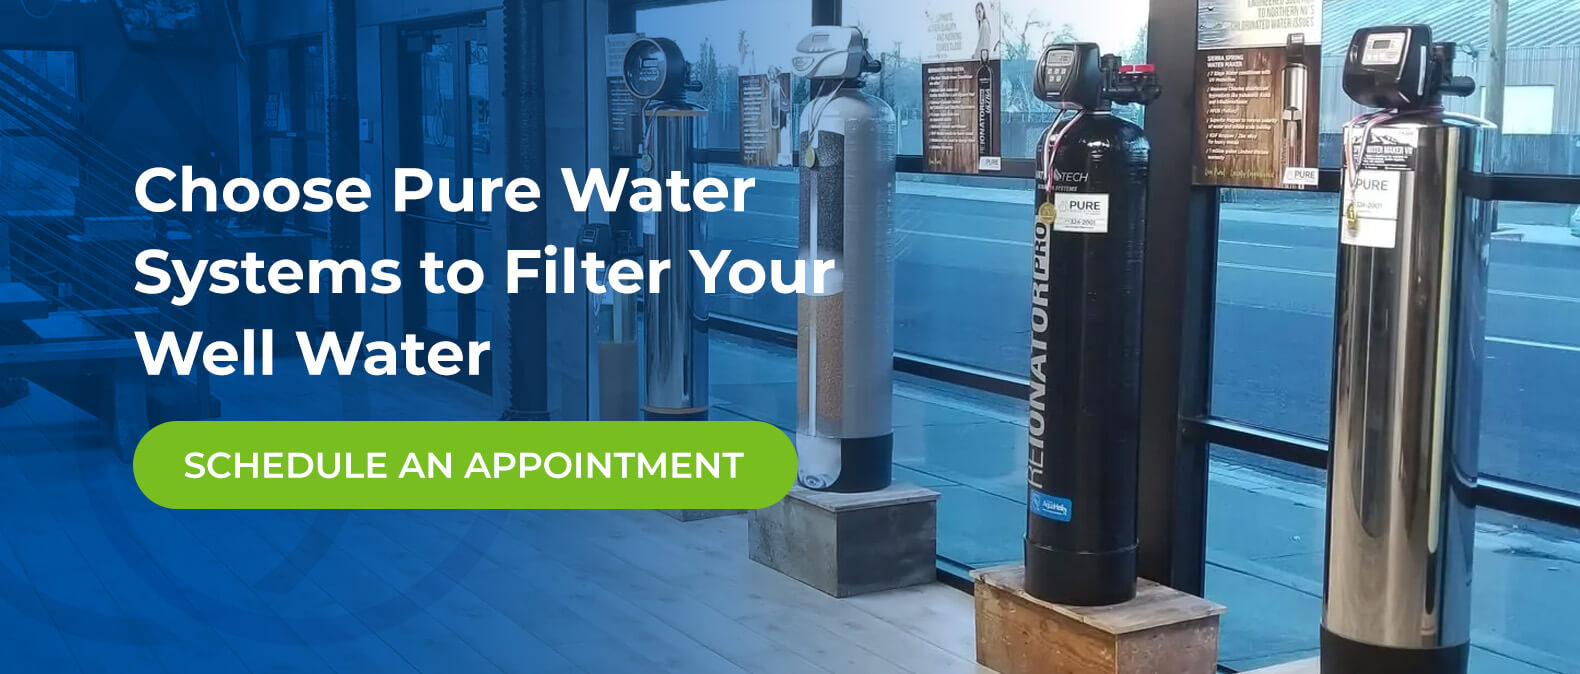 Choose pure water systems to filter your well water